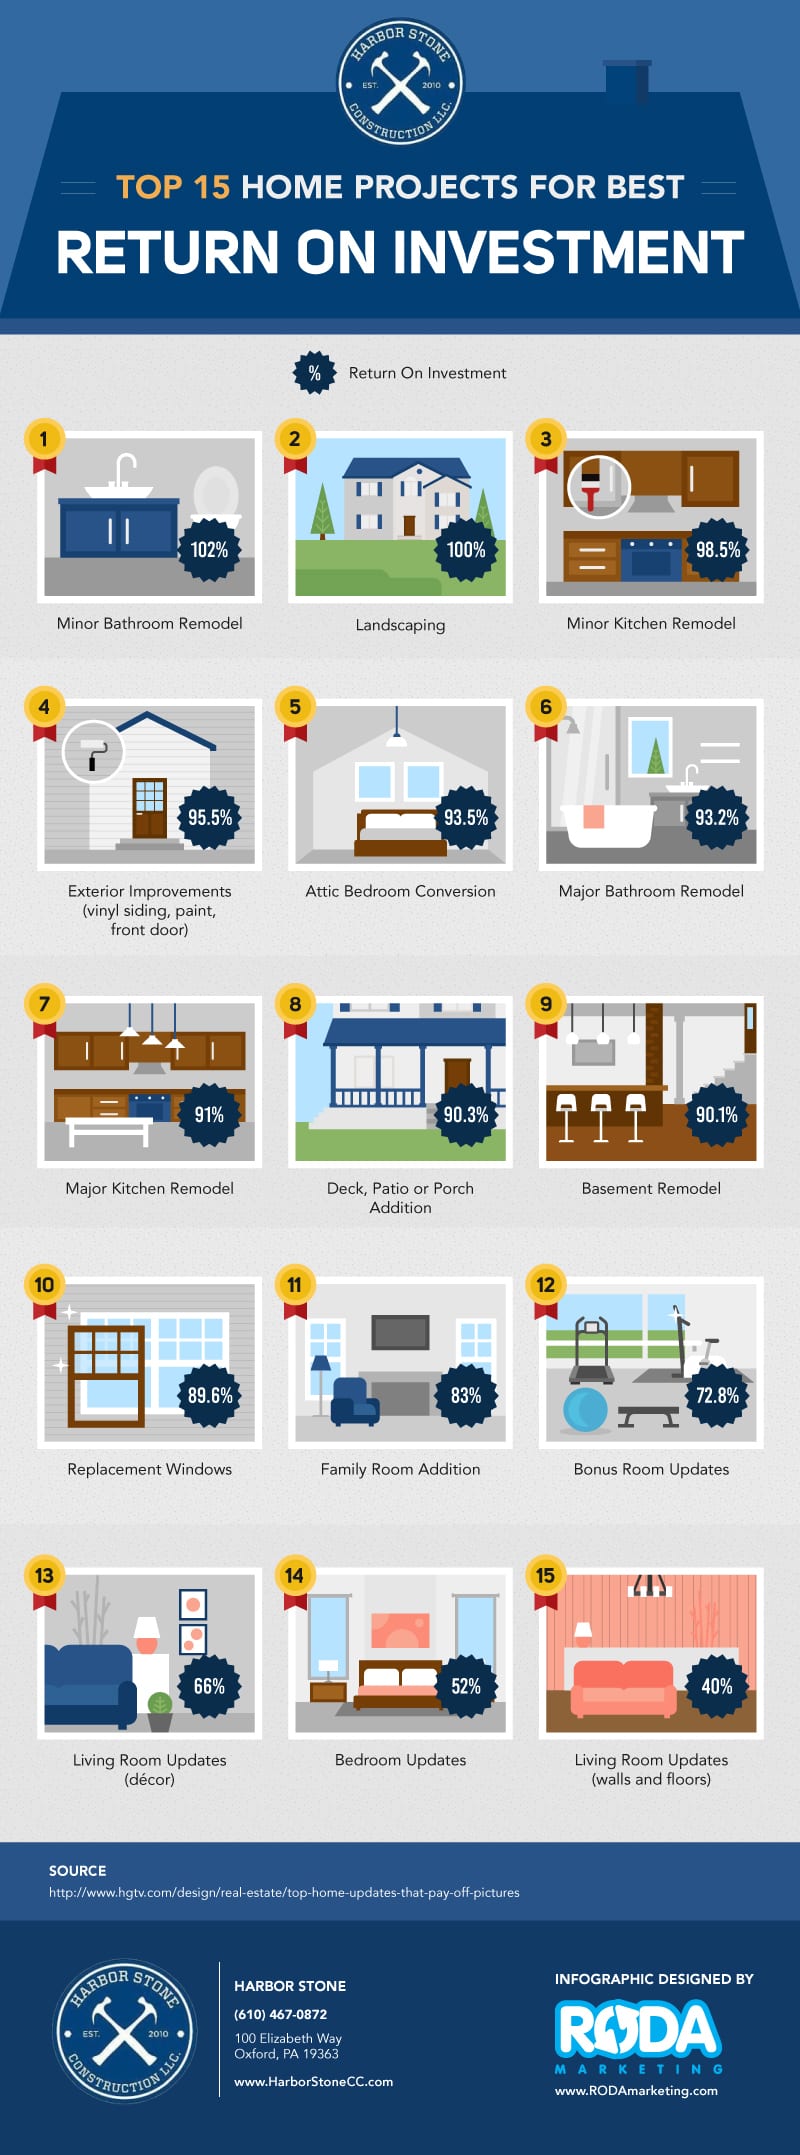 Top 15 Home Projects for Best Return on Investment Infographic